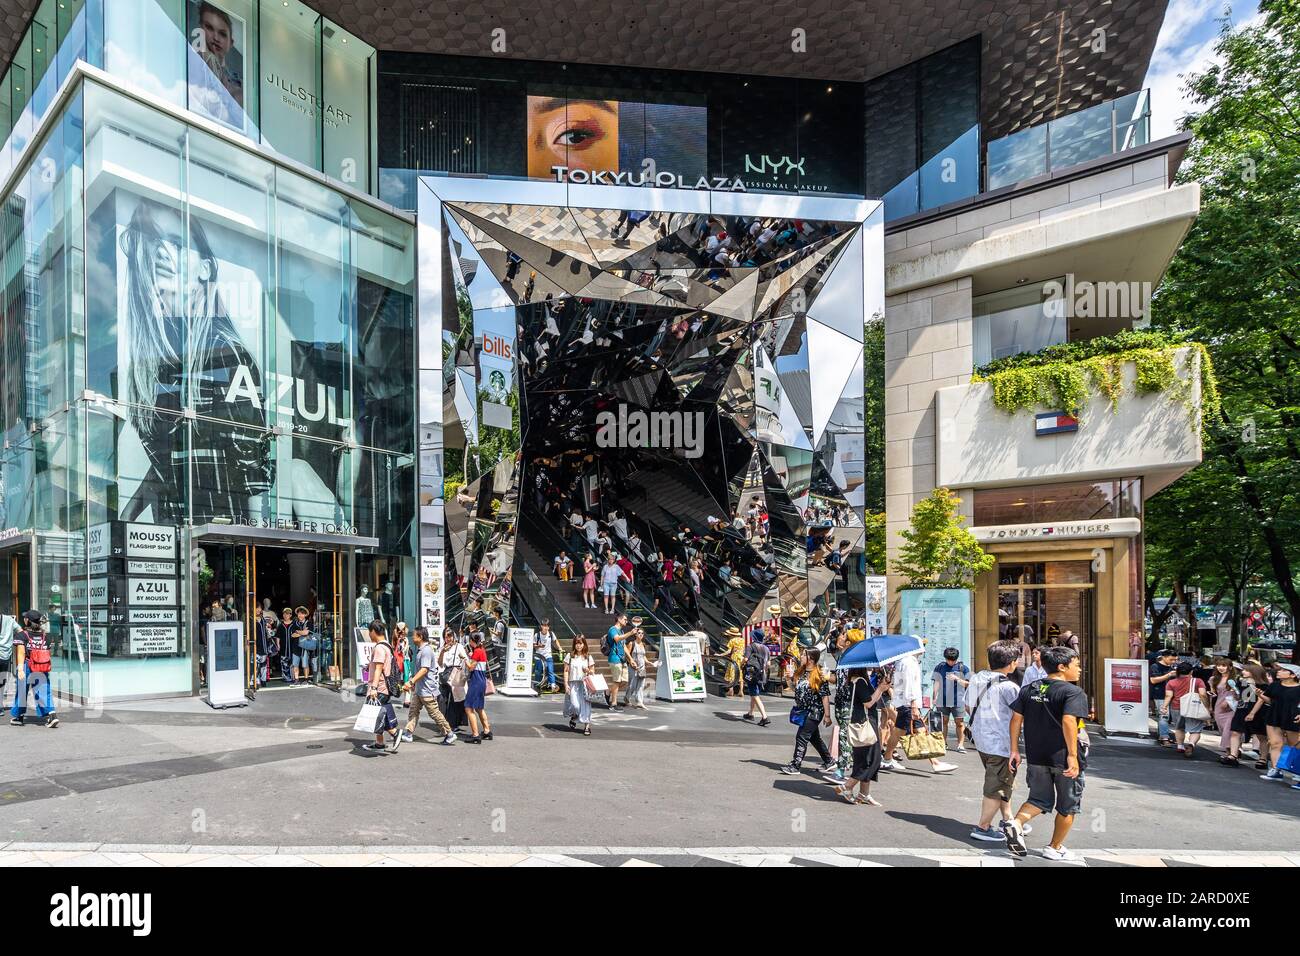 Tokyu Plaza is a fashion shopping mall in Omotesando district with scenic entrance covered by mirrors. Tokyo, Japan, August 2019 Stock Photo